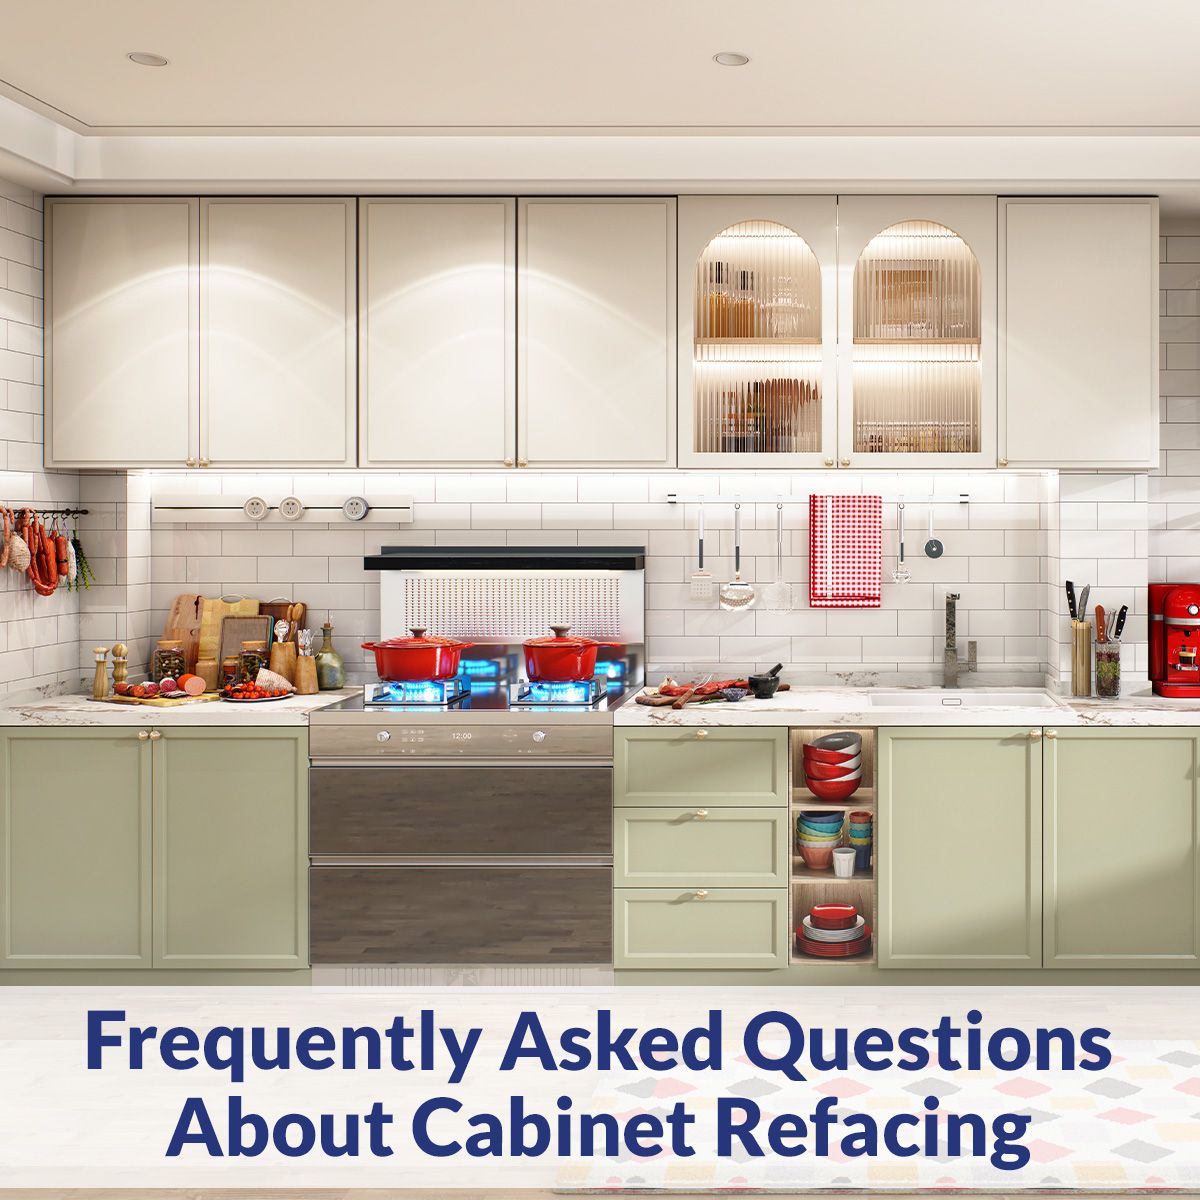 Frequently Asked Questions About Cabinet Refacing